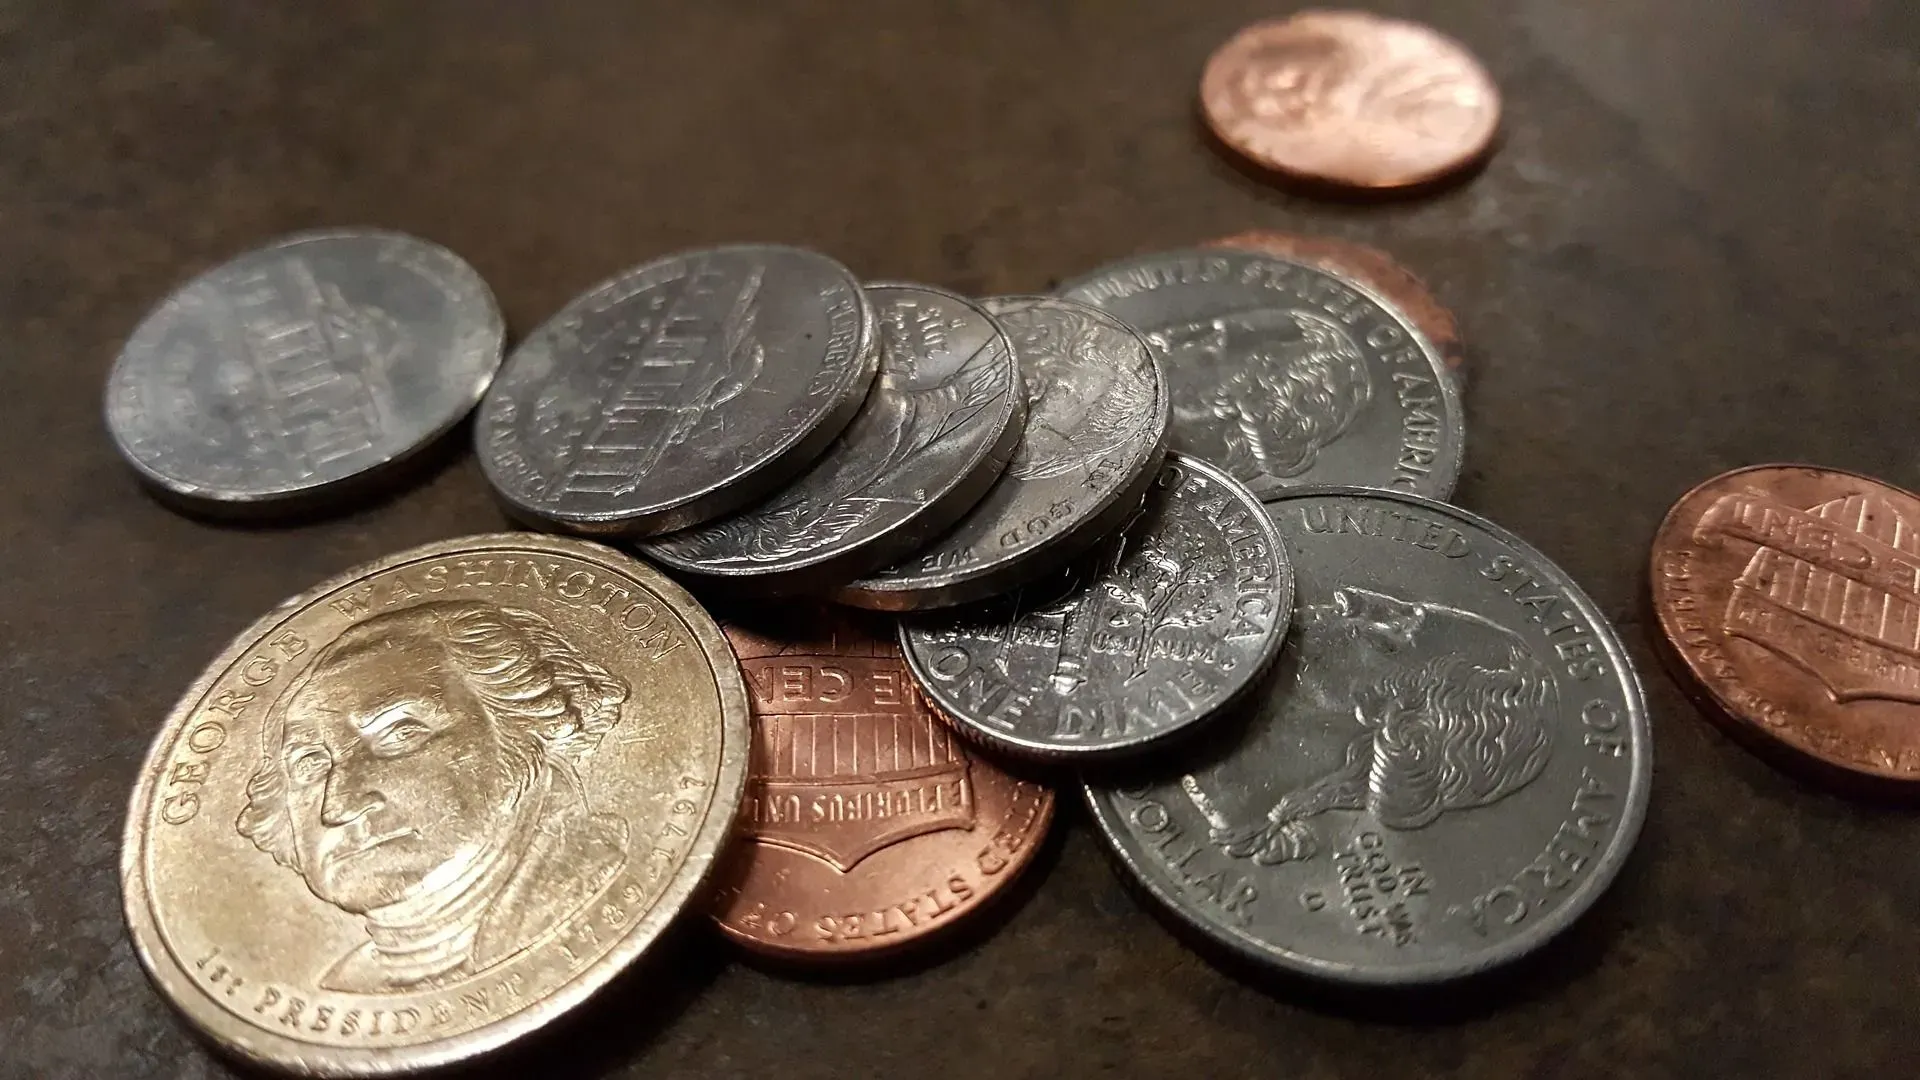 Between 1873-1964, the U.S. quarters were composed of 90% silver and 10% copper.